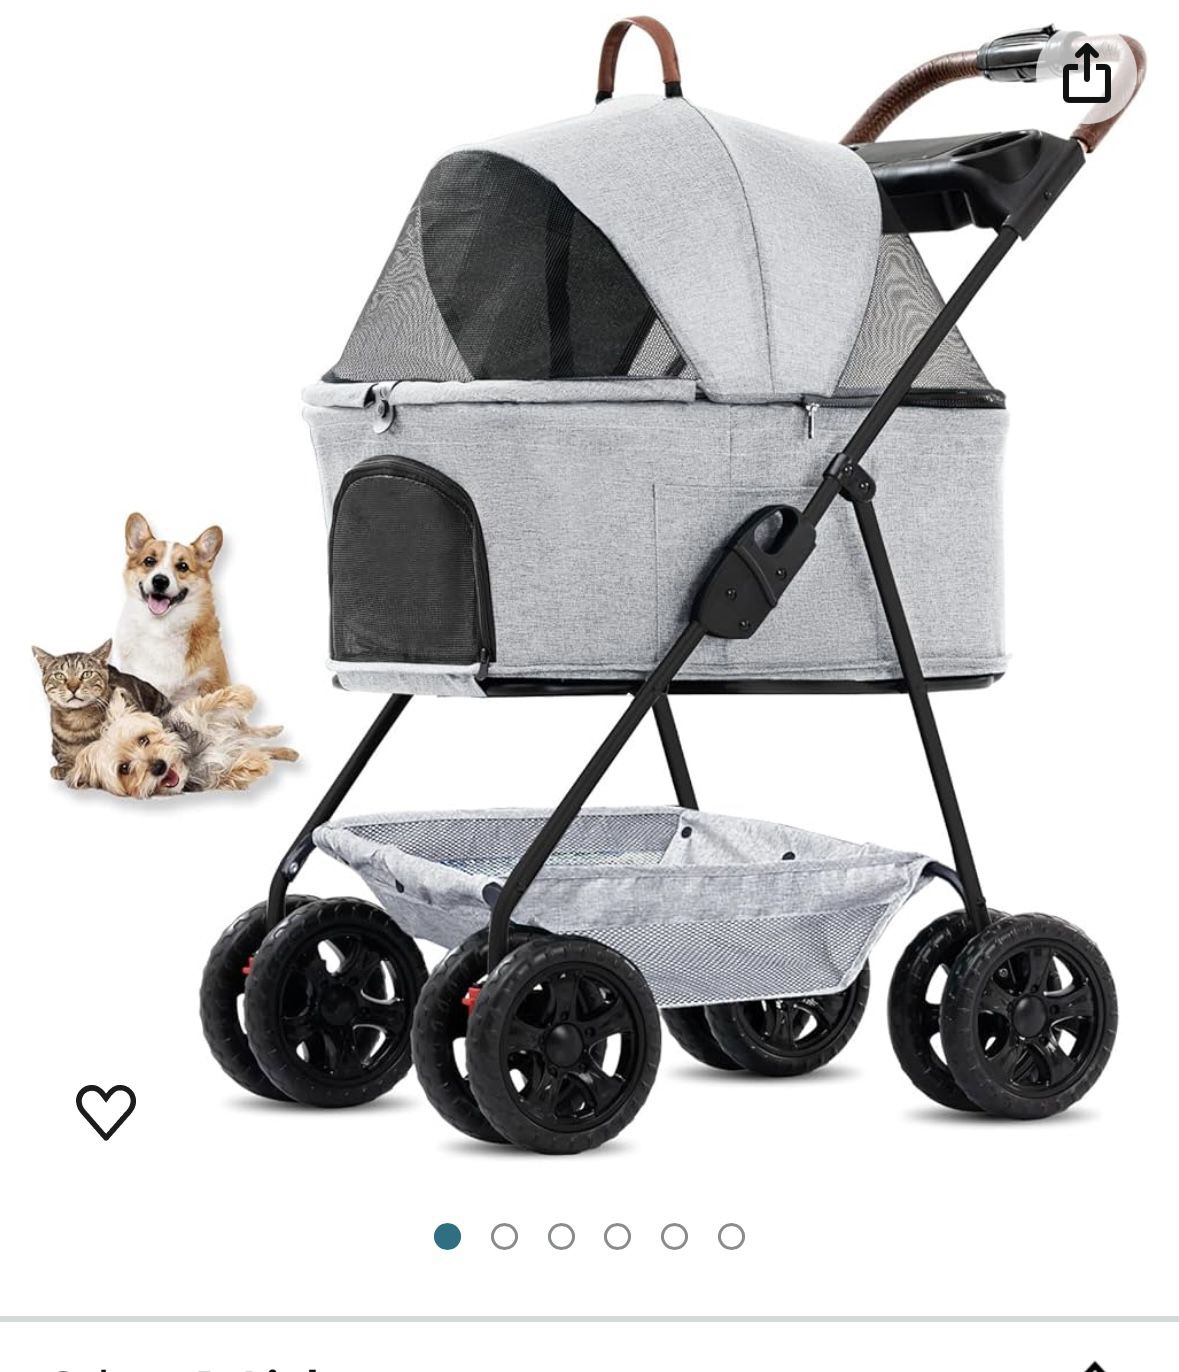 Pet Stroller, 3 in 1 Multifunction Pet Travel System,4 Wheel Foldable Pet Stroller with Storage Basket for Small Medium Dogs & Cats